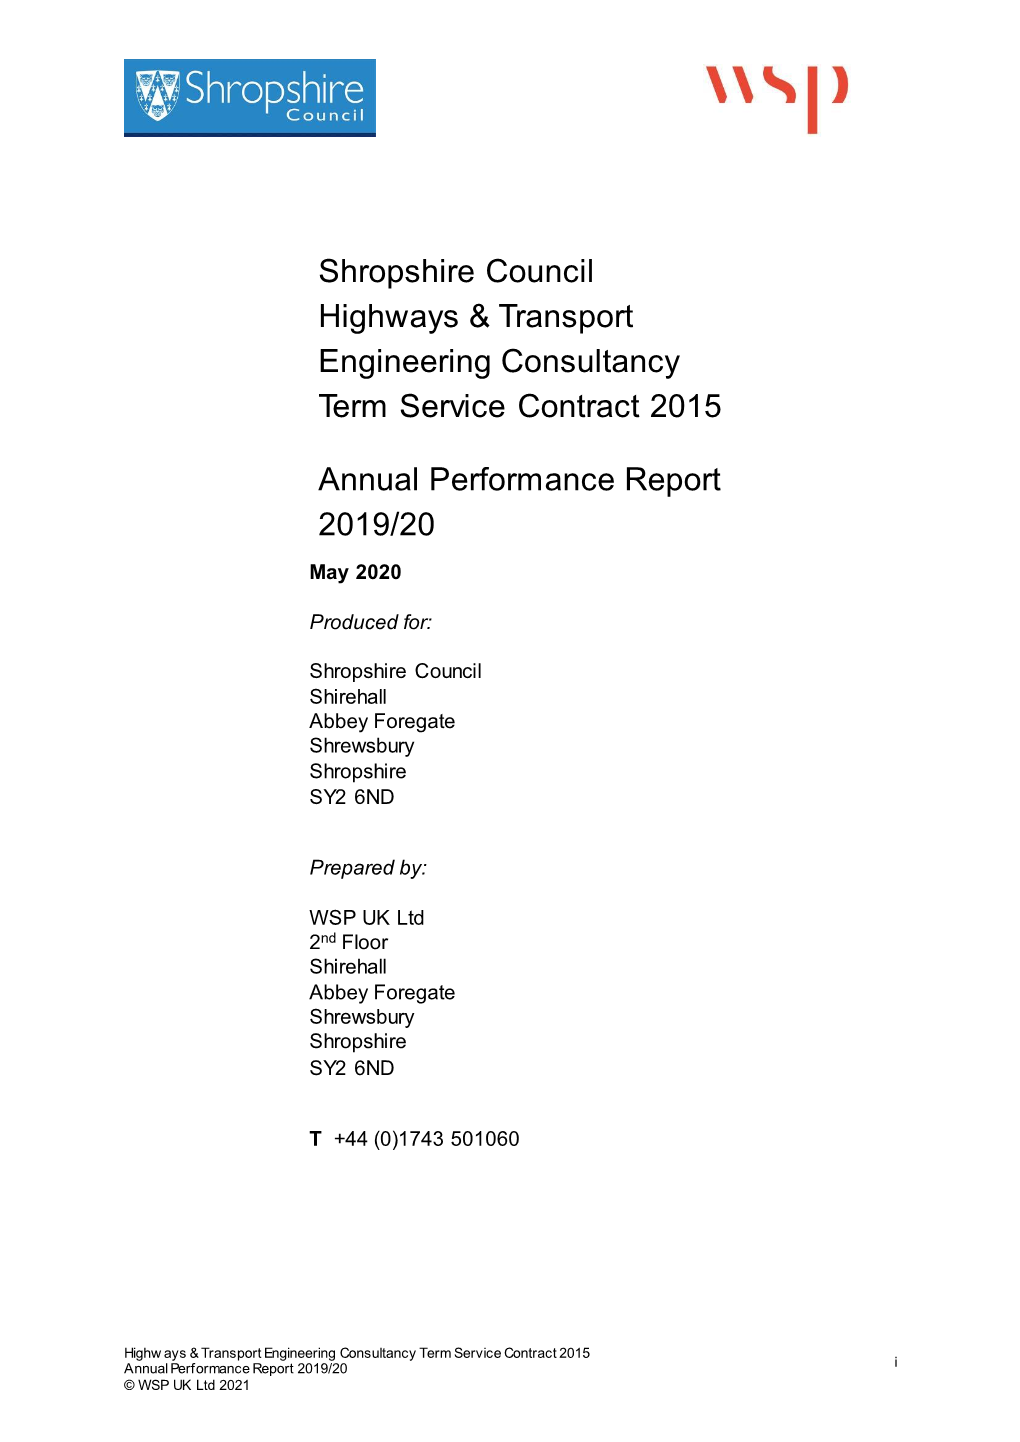 Shropshire Council Highways & Transport Engineering Consultancy